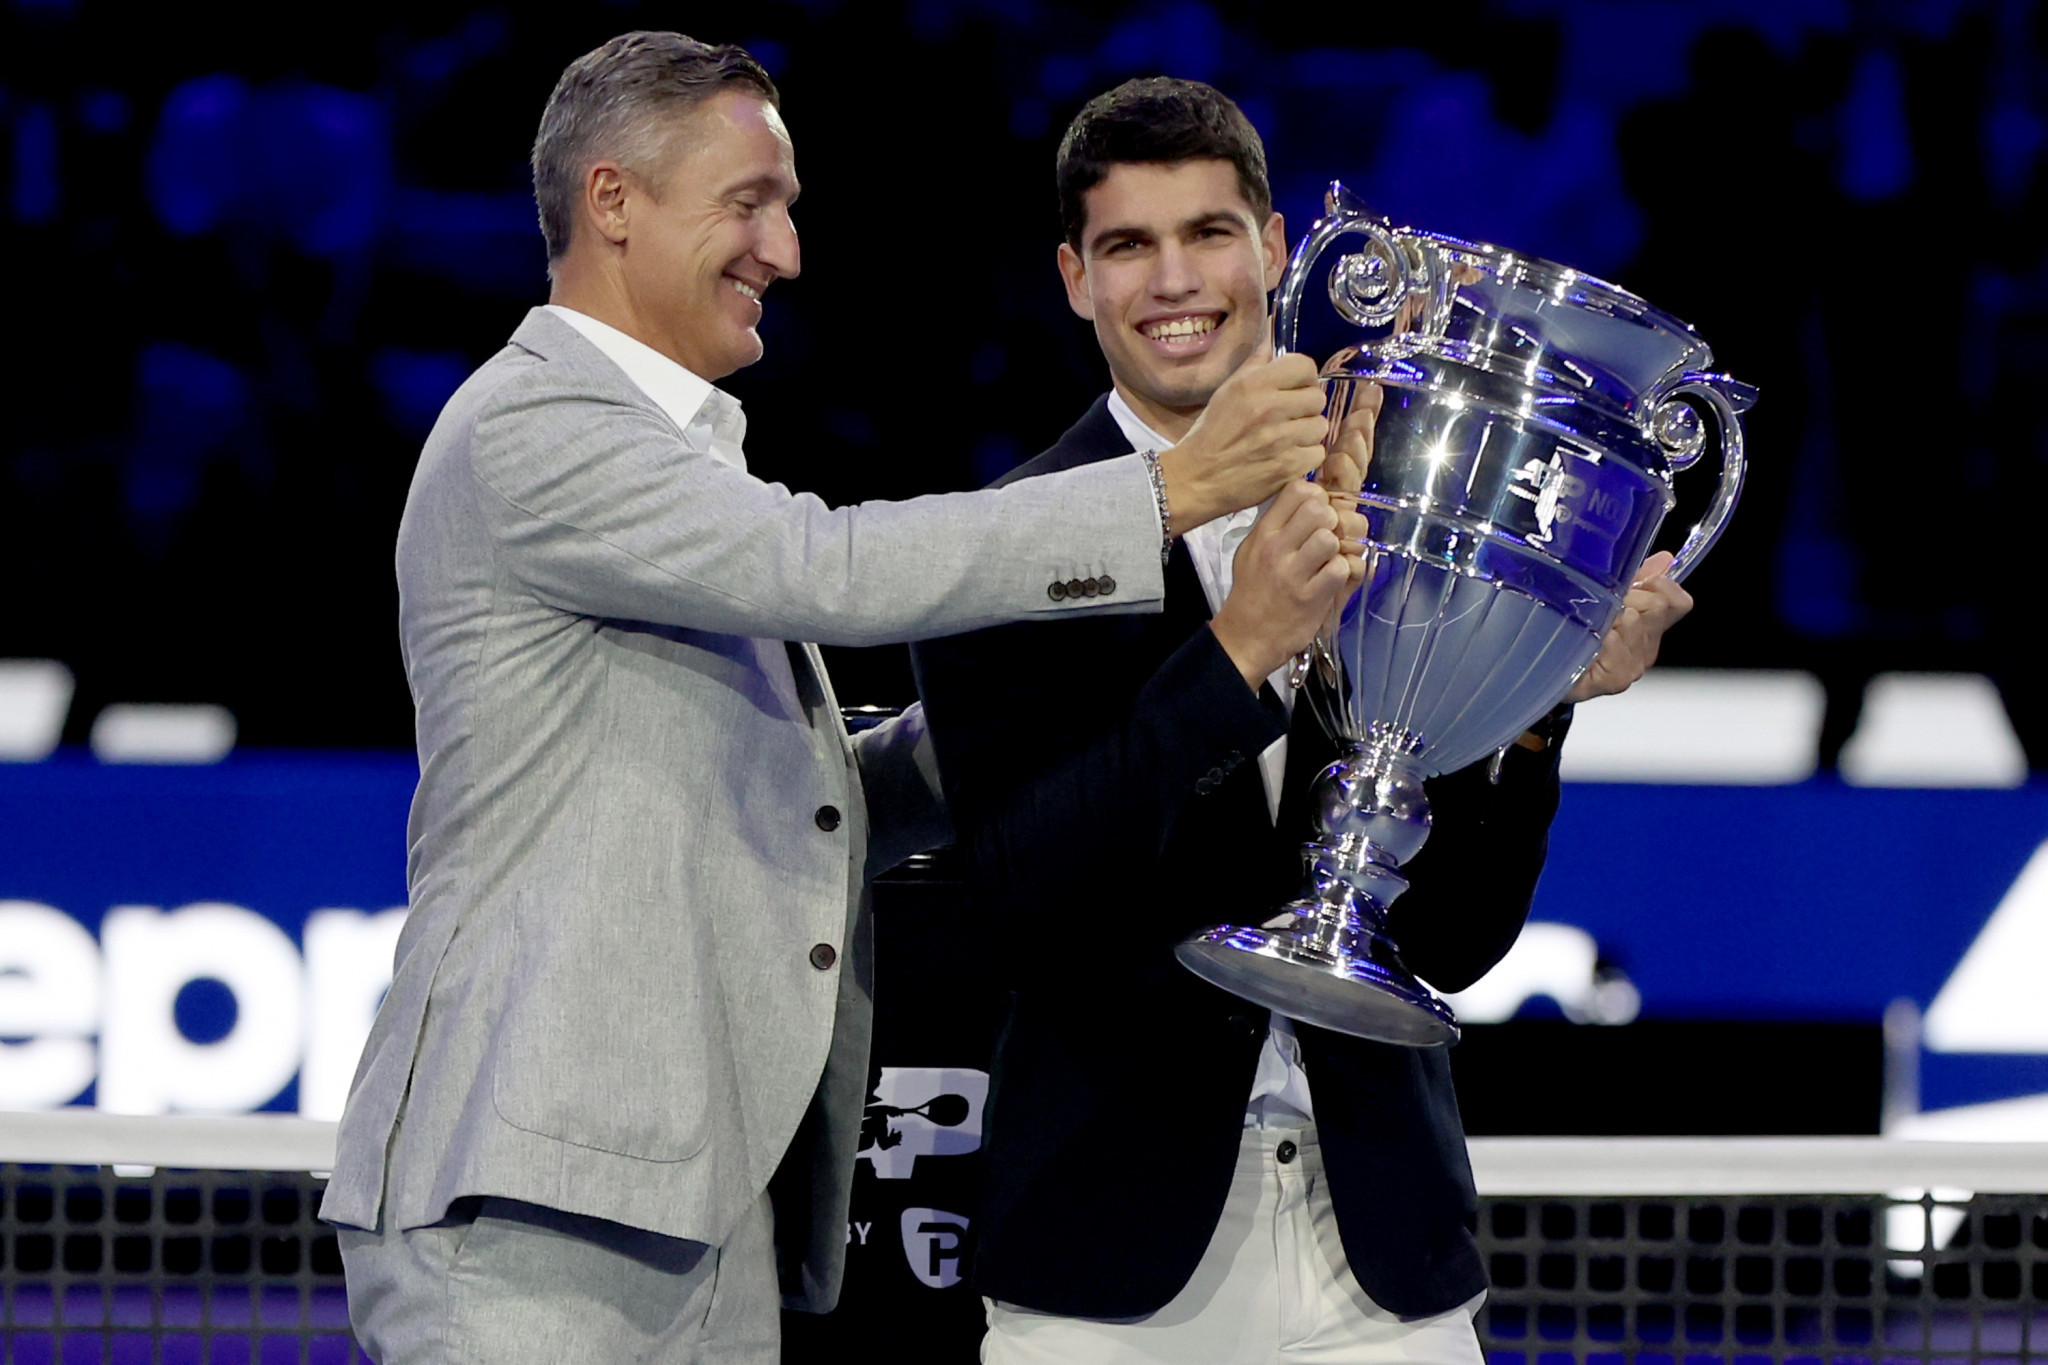 ATP elevating three tournaments in 2025 in calendar restructuring